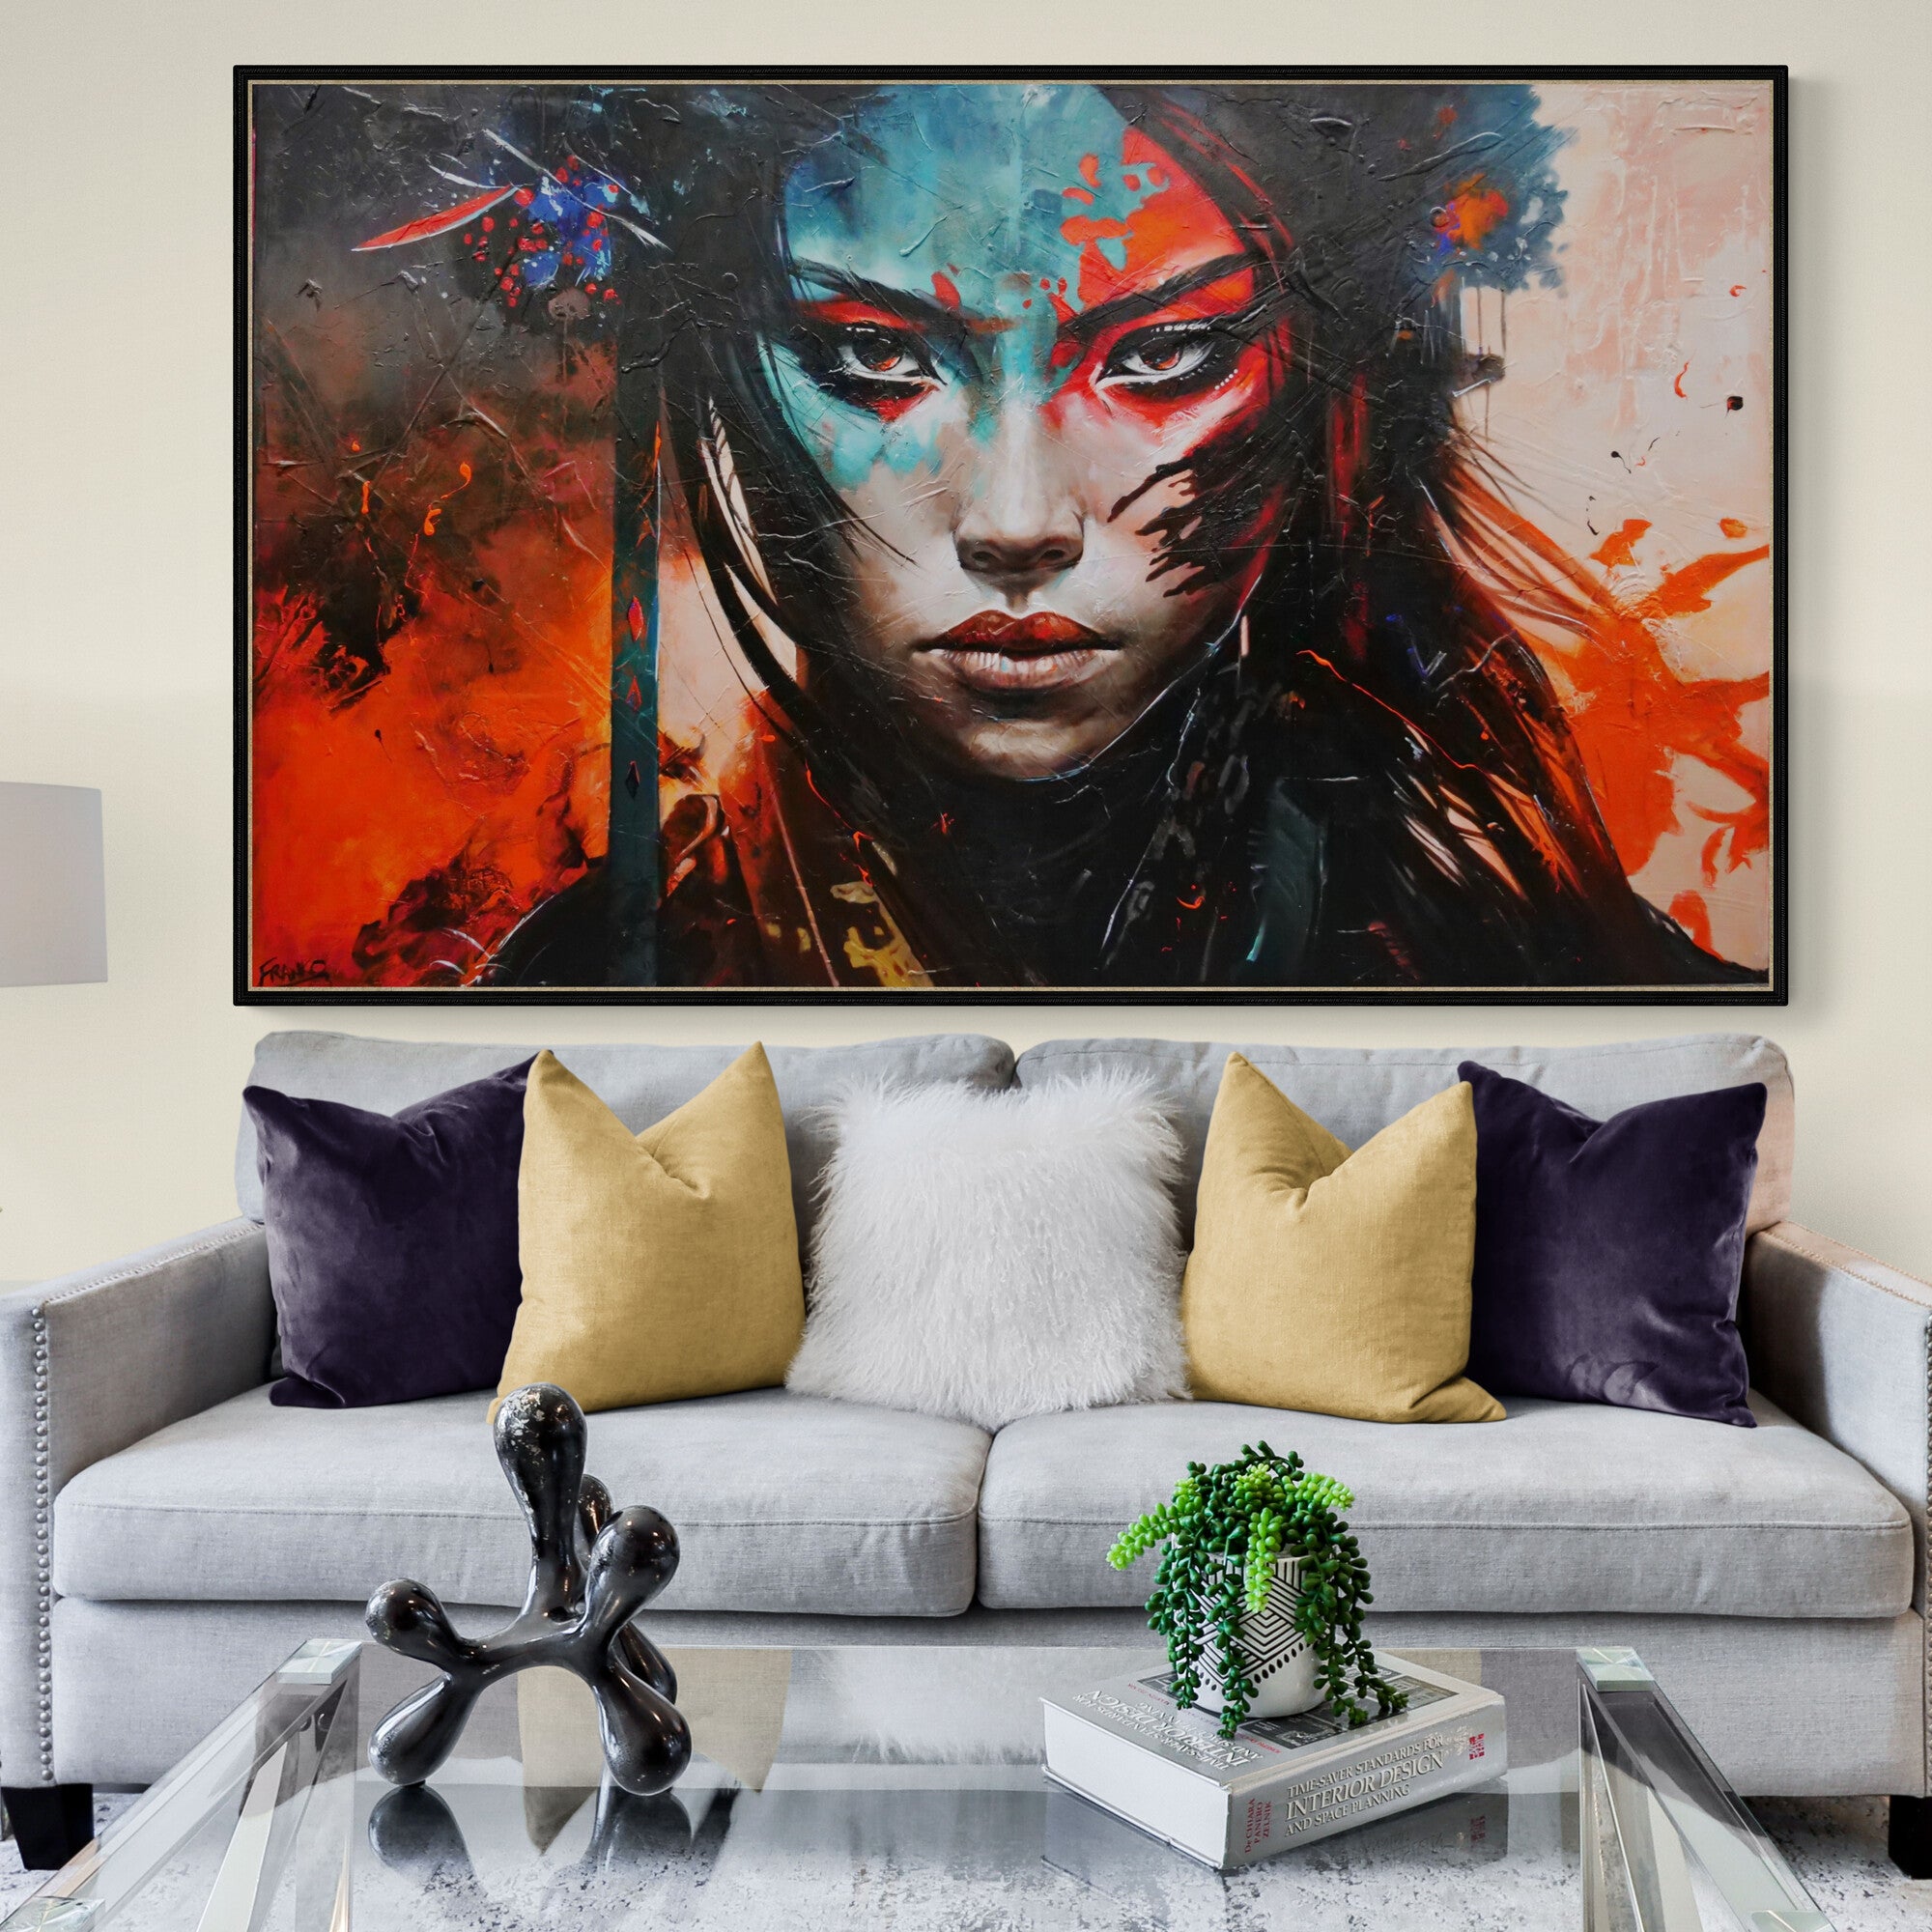 Otrera 200cm x 120cm Brave and Beautiful Abstract Framed Textured Painting (SOLD)